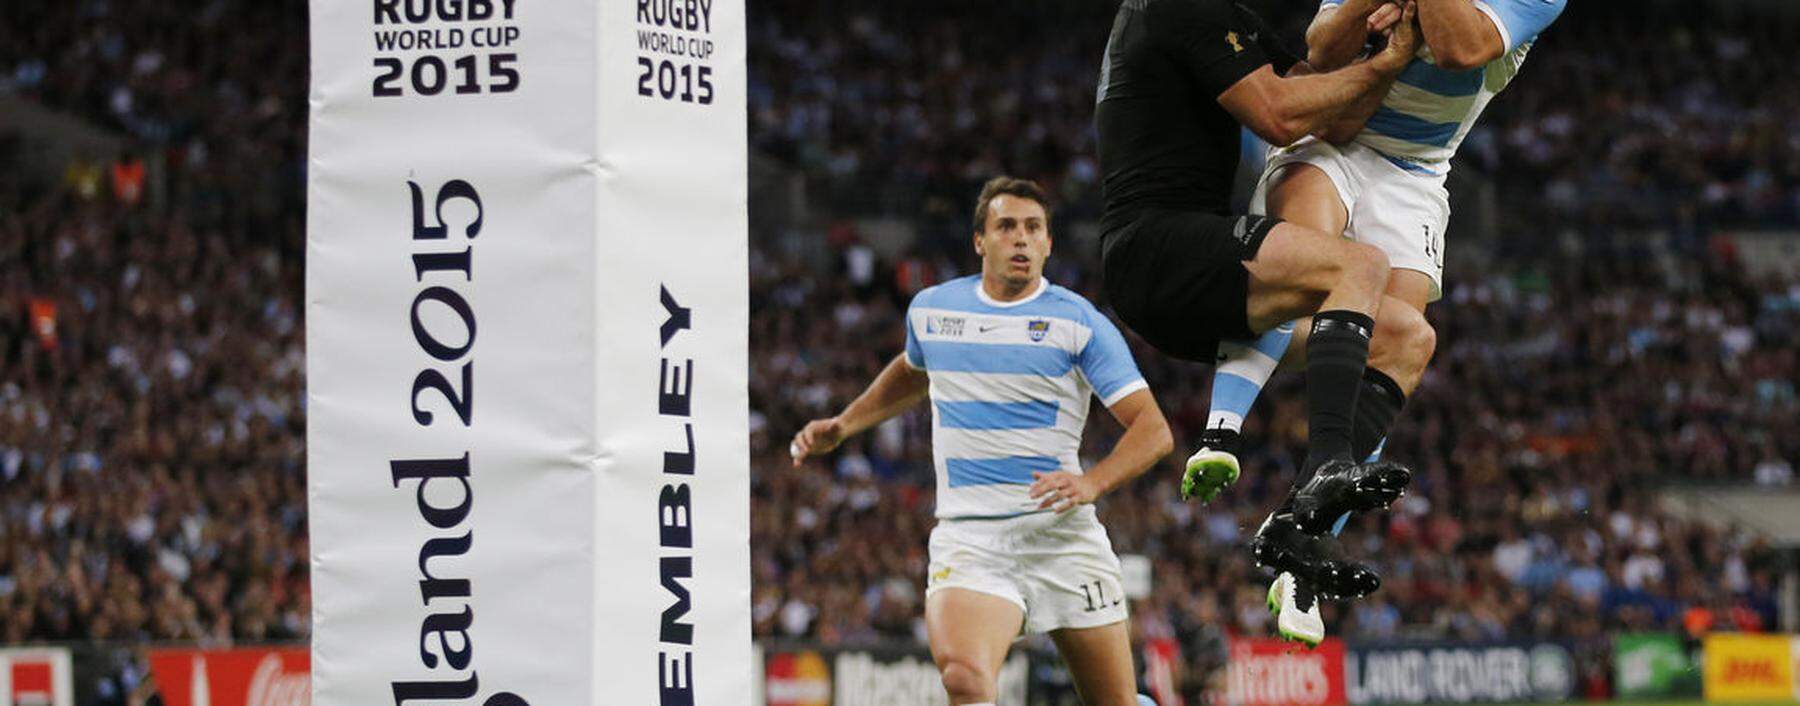 New Zealand v Argentina - IRB Rugby World Cup 2015 Pool C